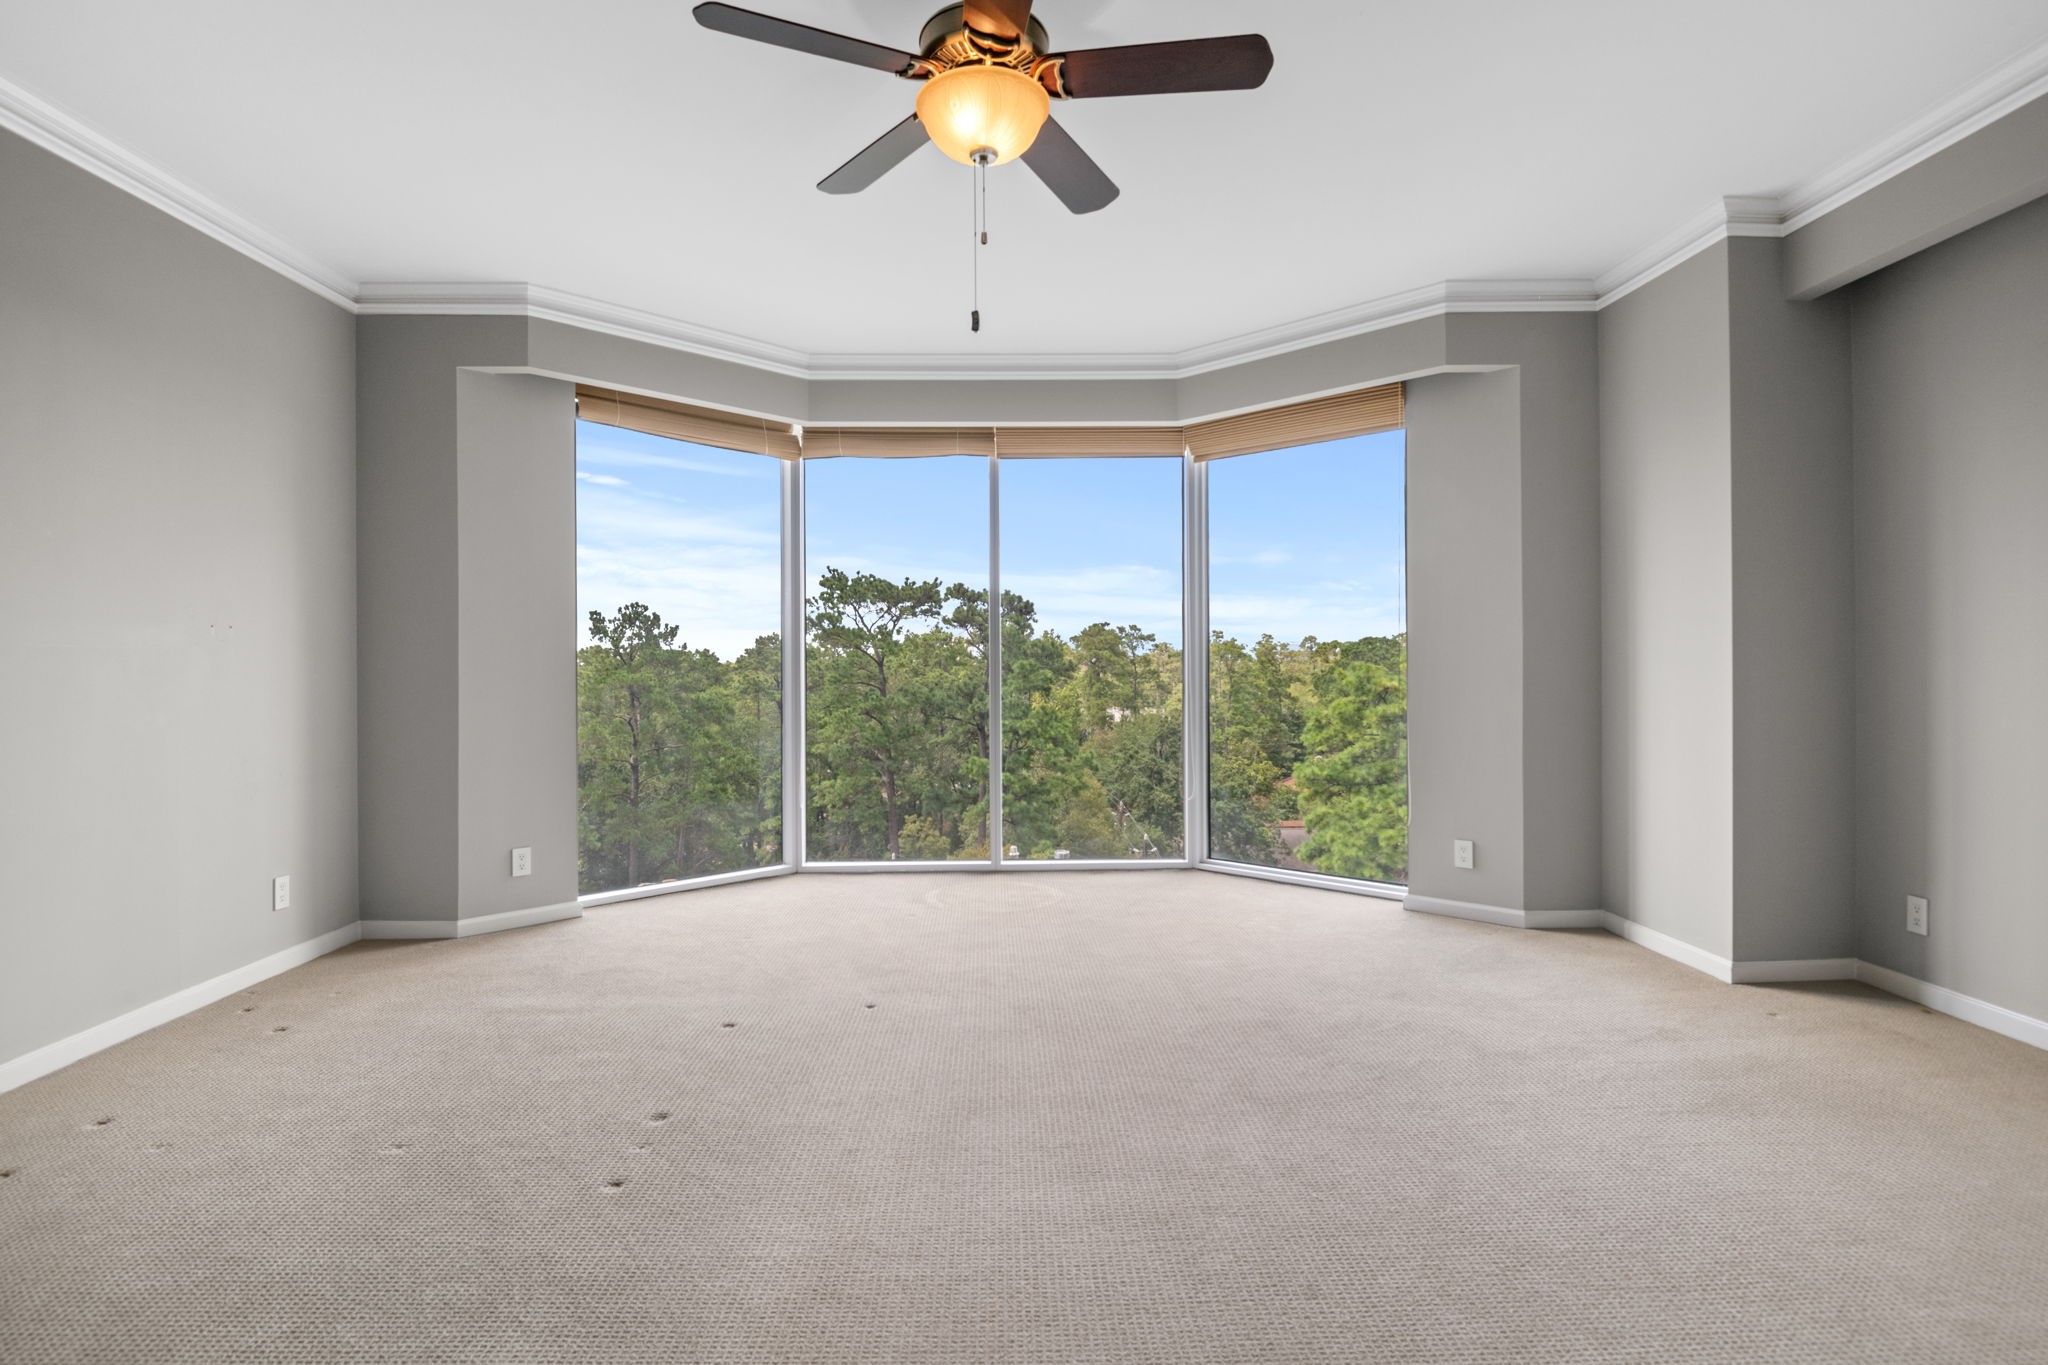 19x15 Primary Bedroom - 
Imagine waking up to that view every day. The bay window area is large enough for a sitting area. Crown molding and a ceiling fan with light add to the beauty and comfort of the room.